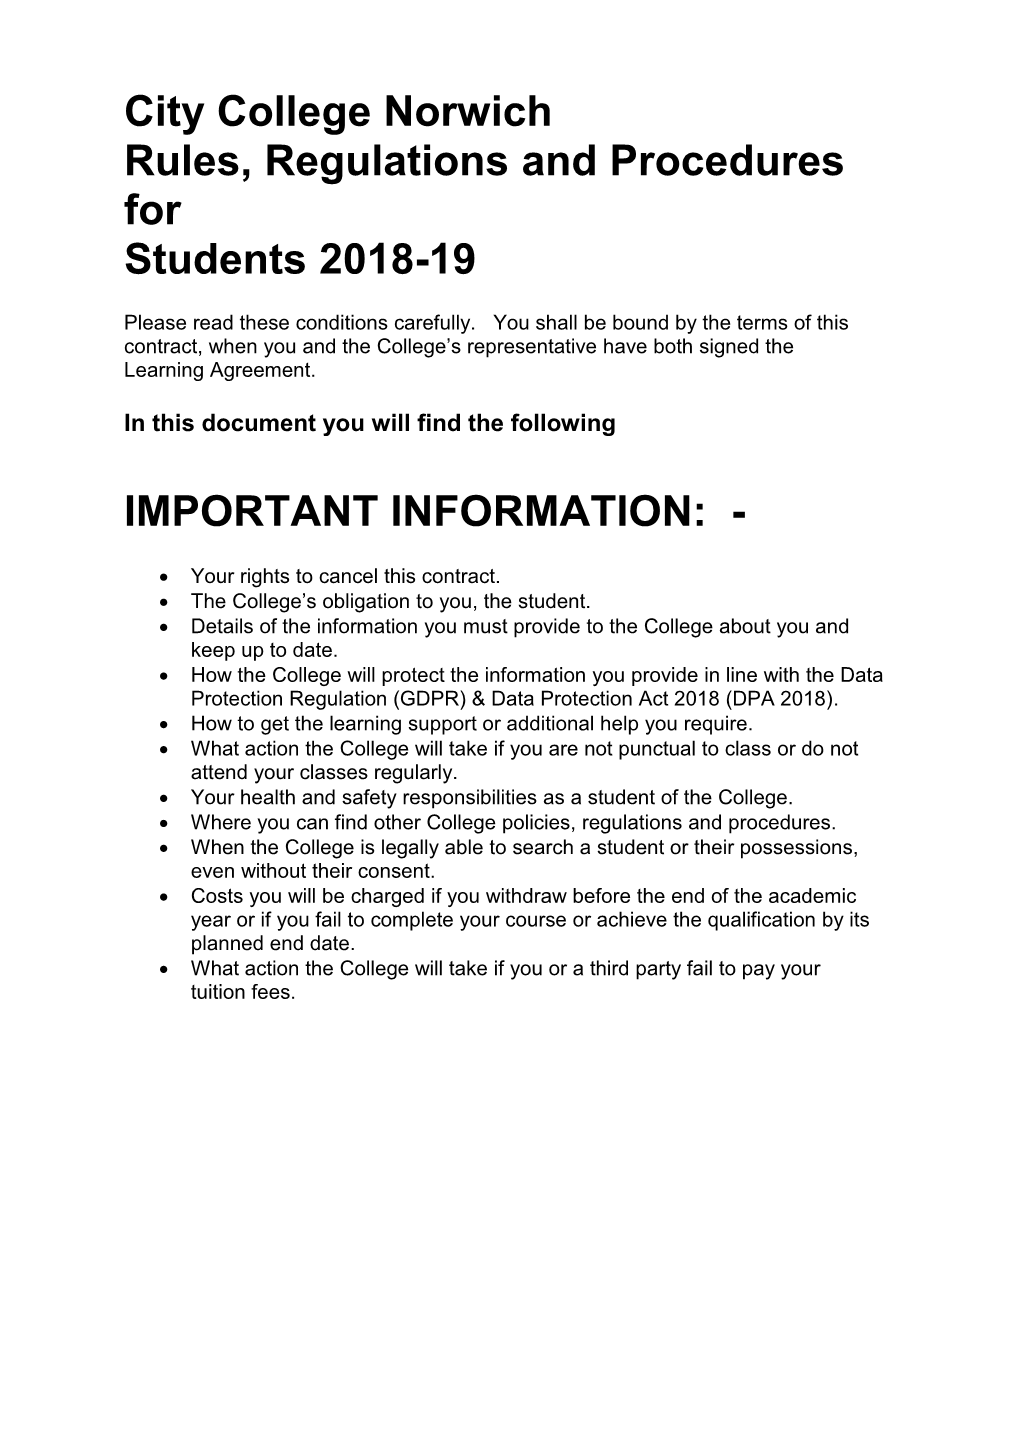 City College Norwich Rules, Regulations and Procedures for Students 2018-19 IMPORTANT INFORMATION: